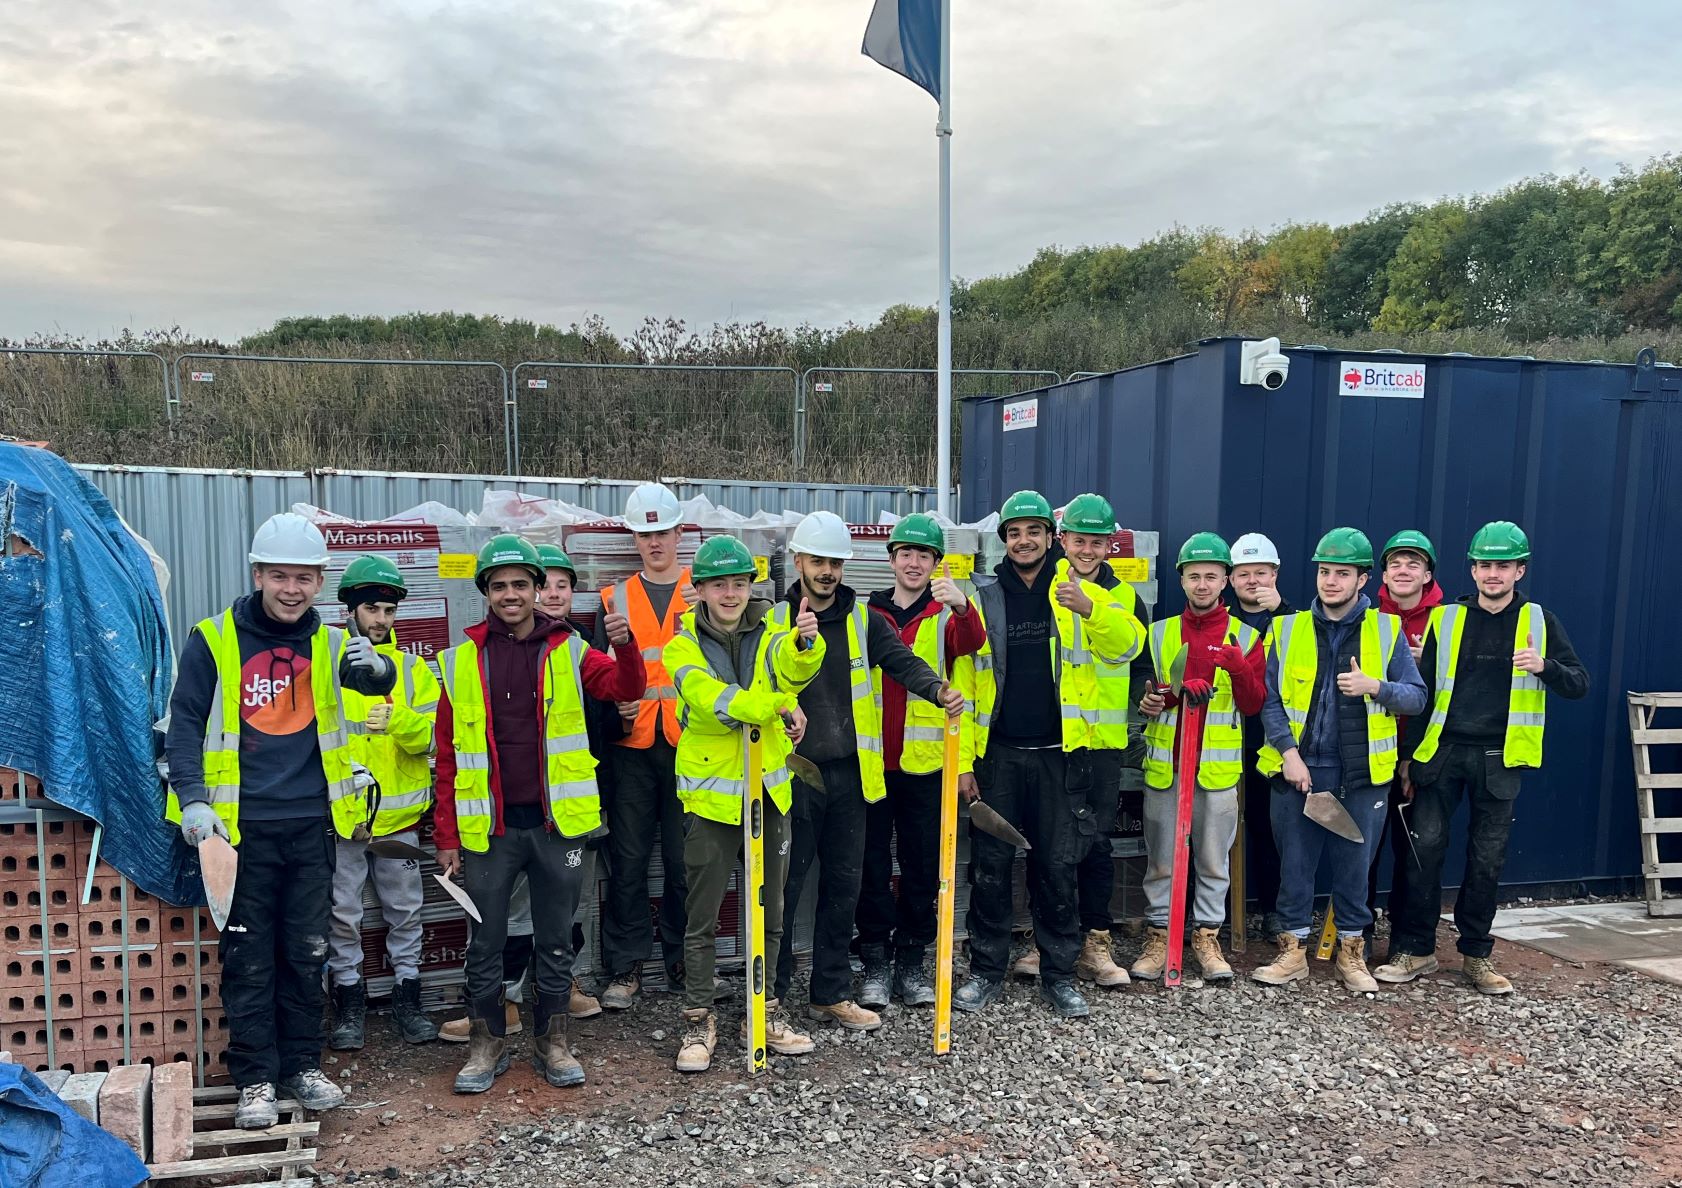 a group of apprentices in site safety clothing smiling at the camera